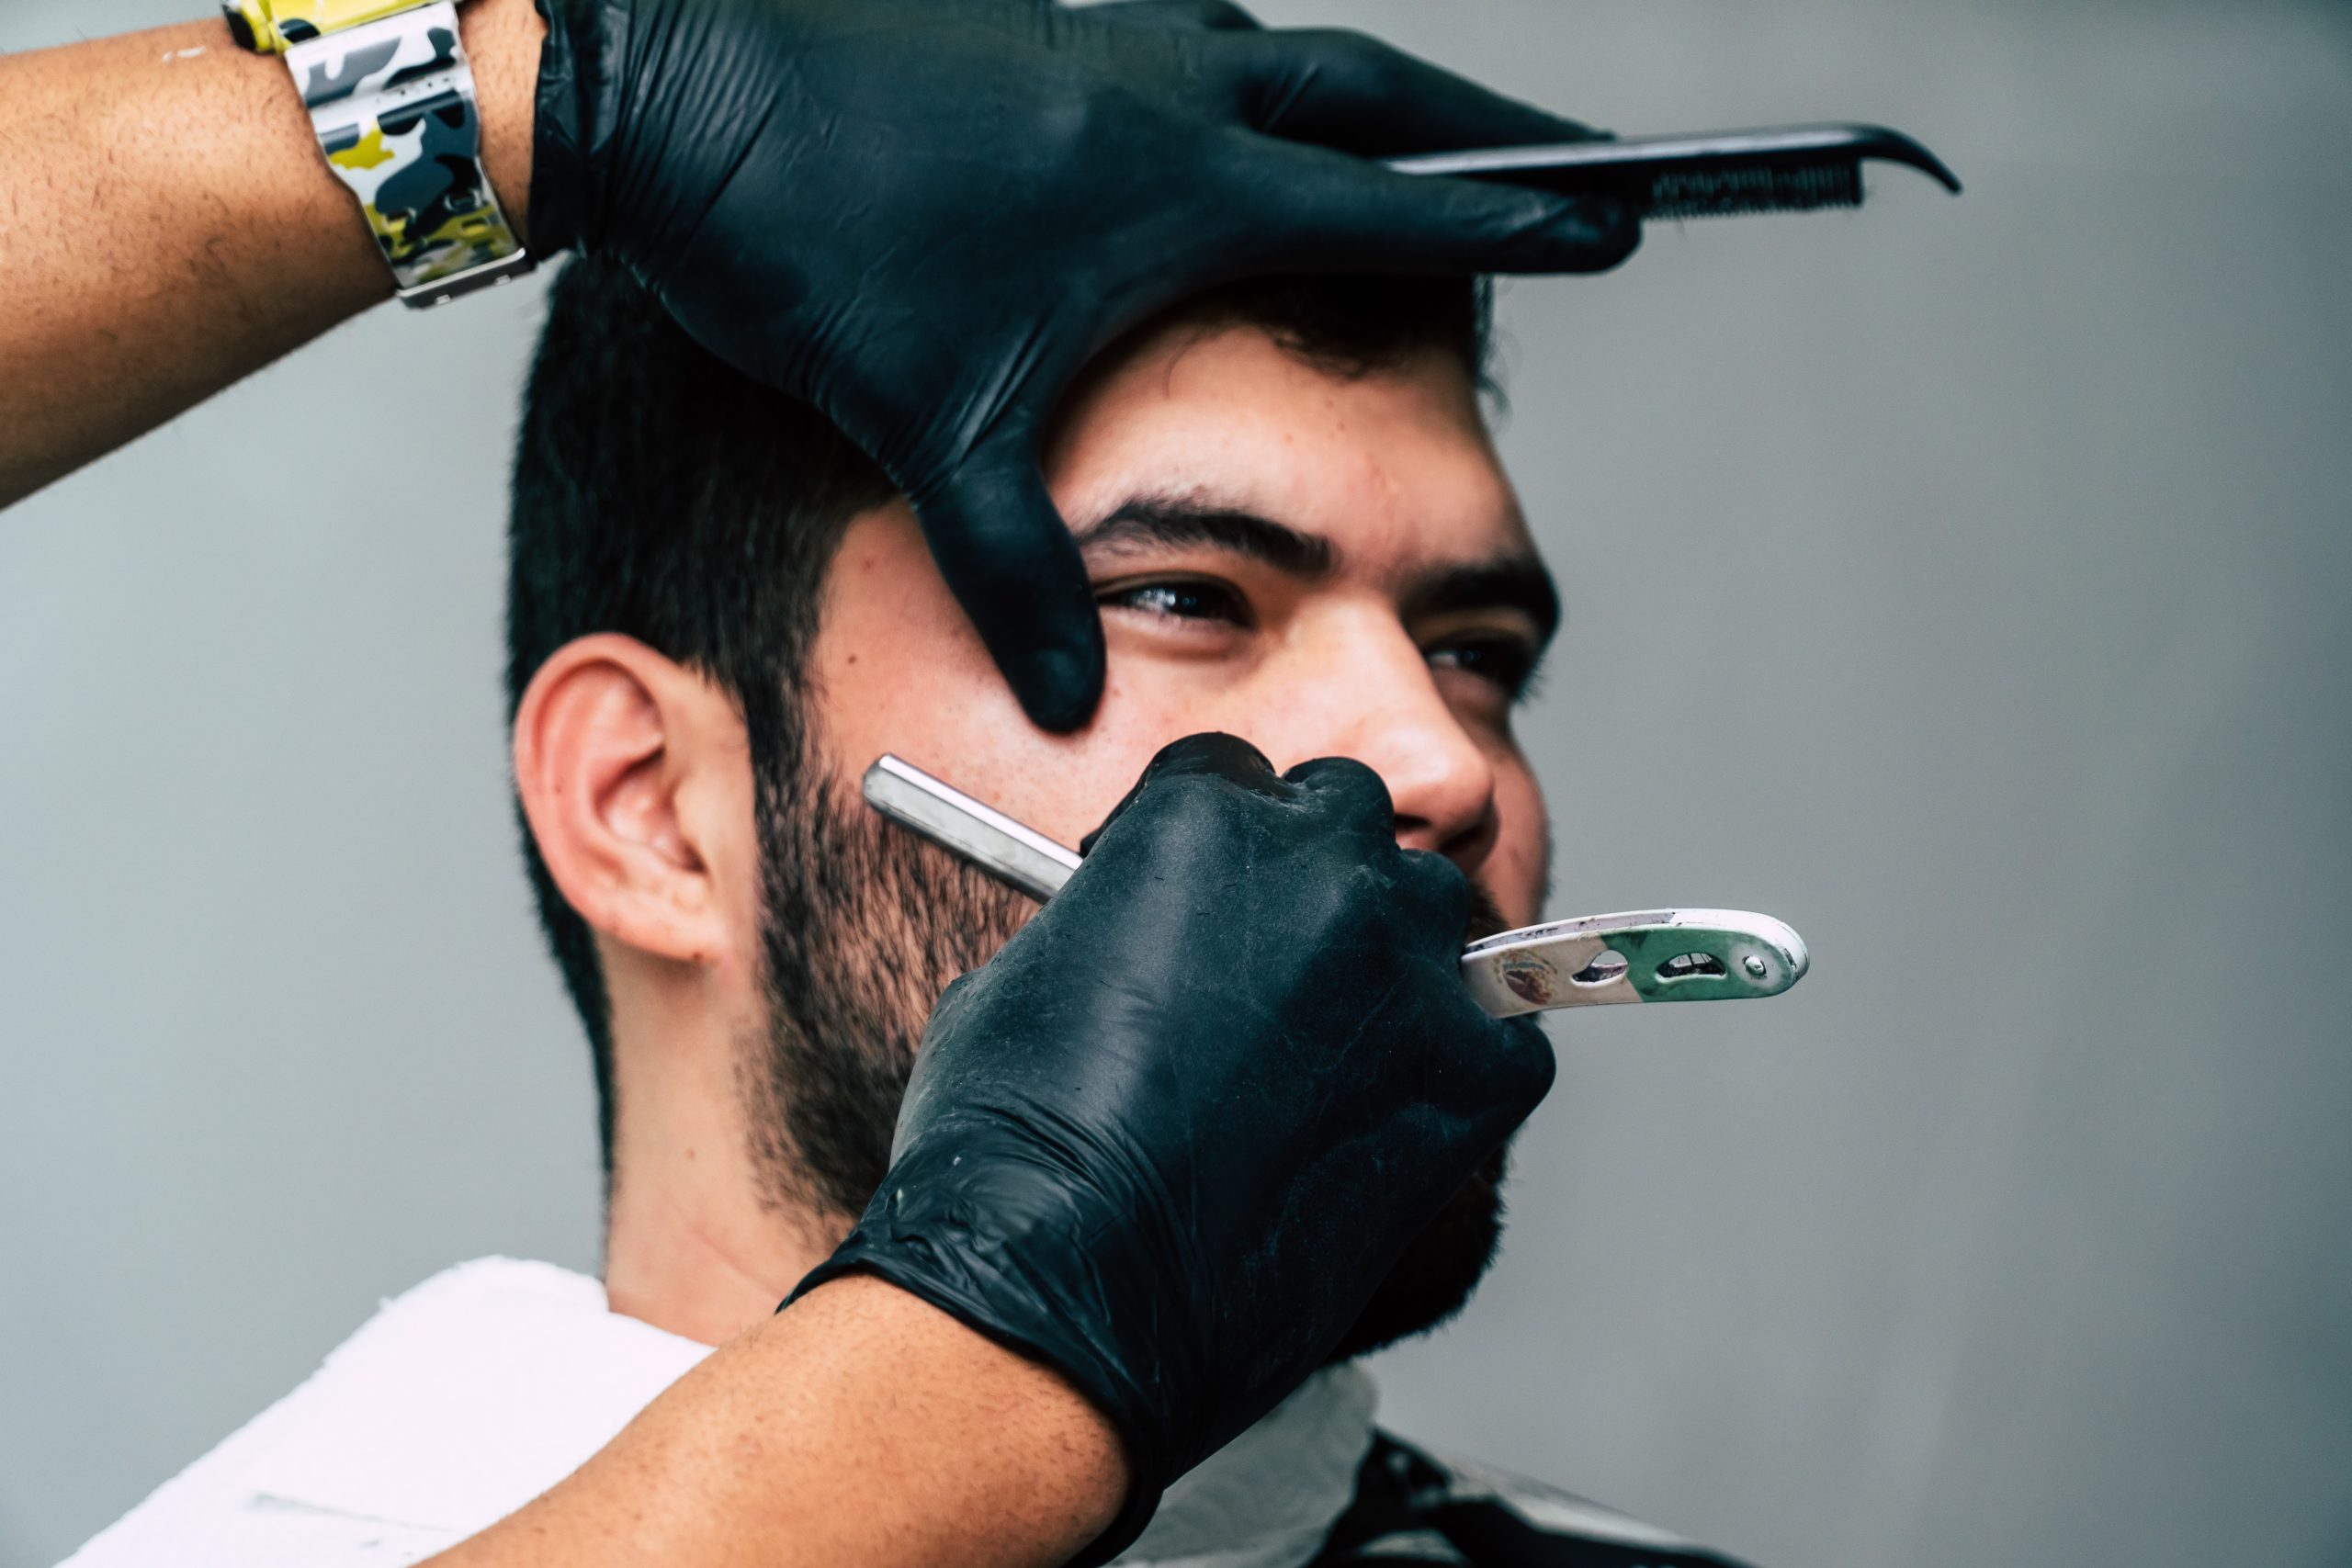 body-confidence-person-shaving-a-man-s-face-with-straight-razor